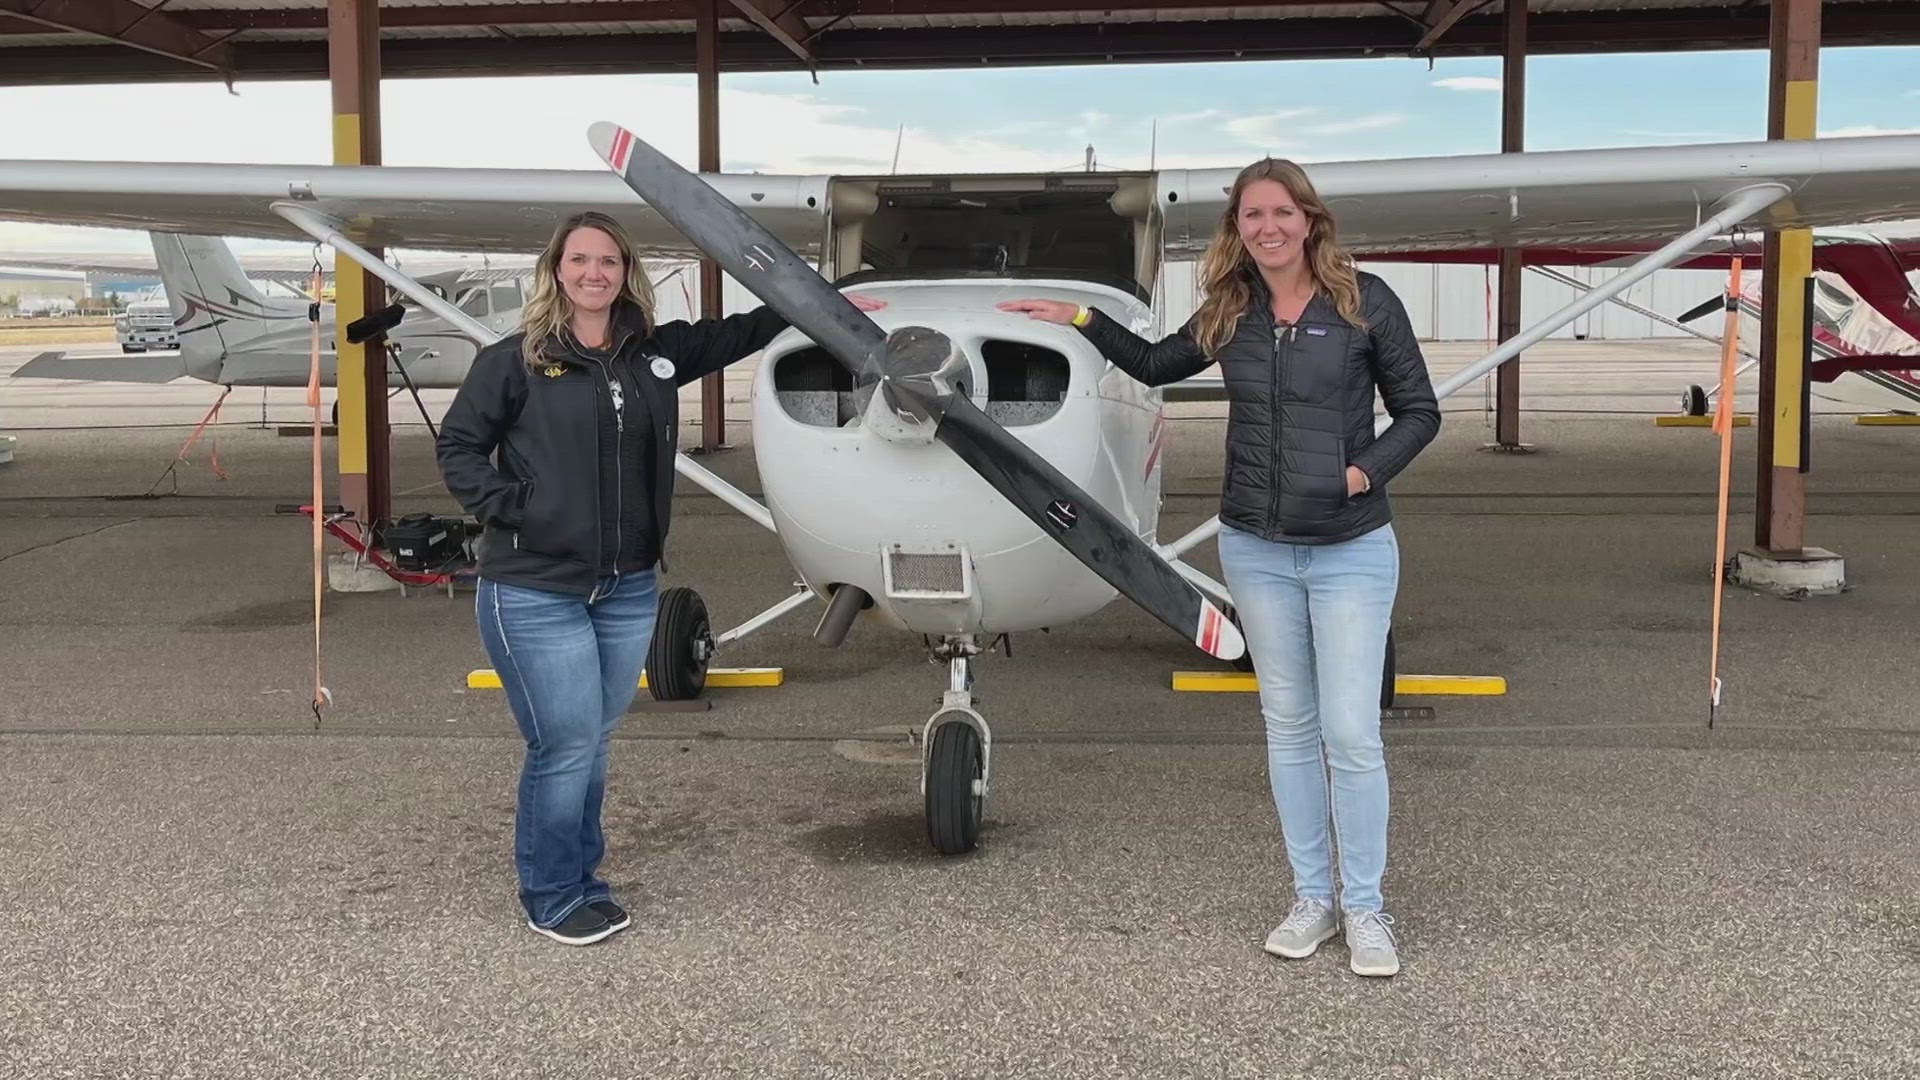 Amanda and Alaina are competing in the June race which spans more than 2,200 nautical miles and end in Fort Collins.